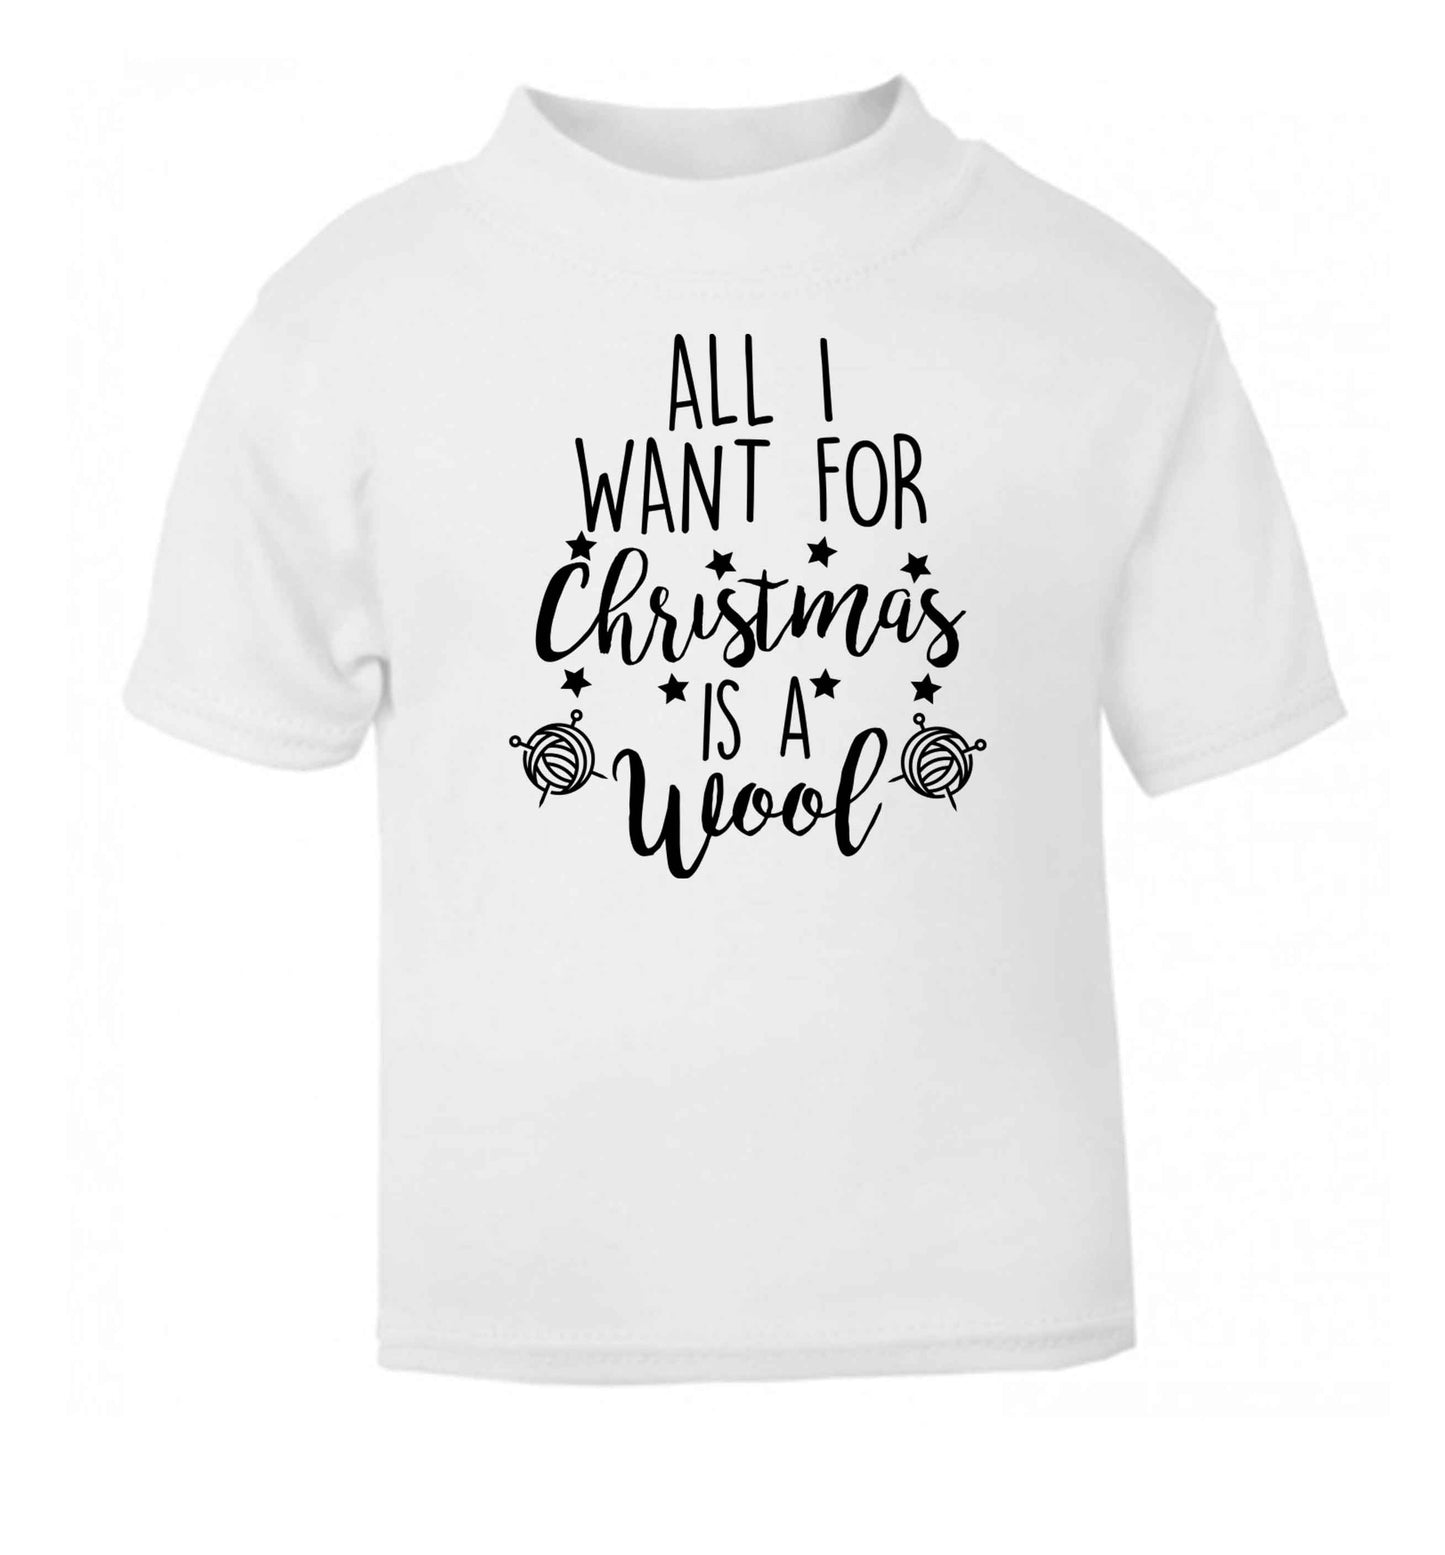 All I want for Christmas is wool! white Baby Toddler Tshirt 2 Years